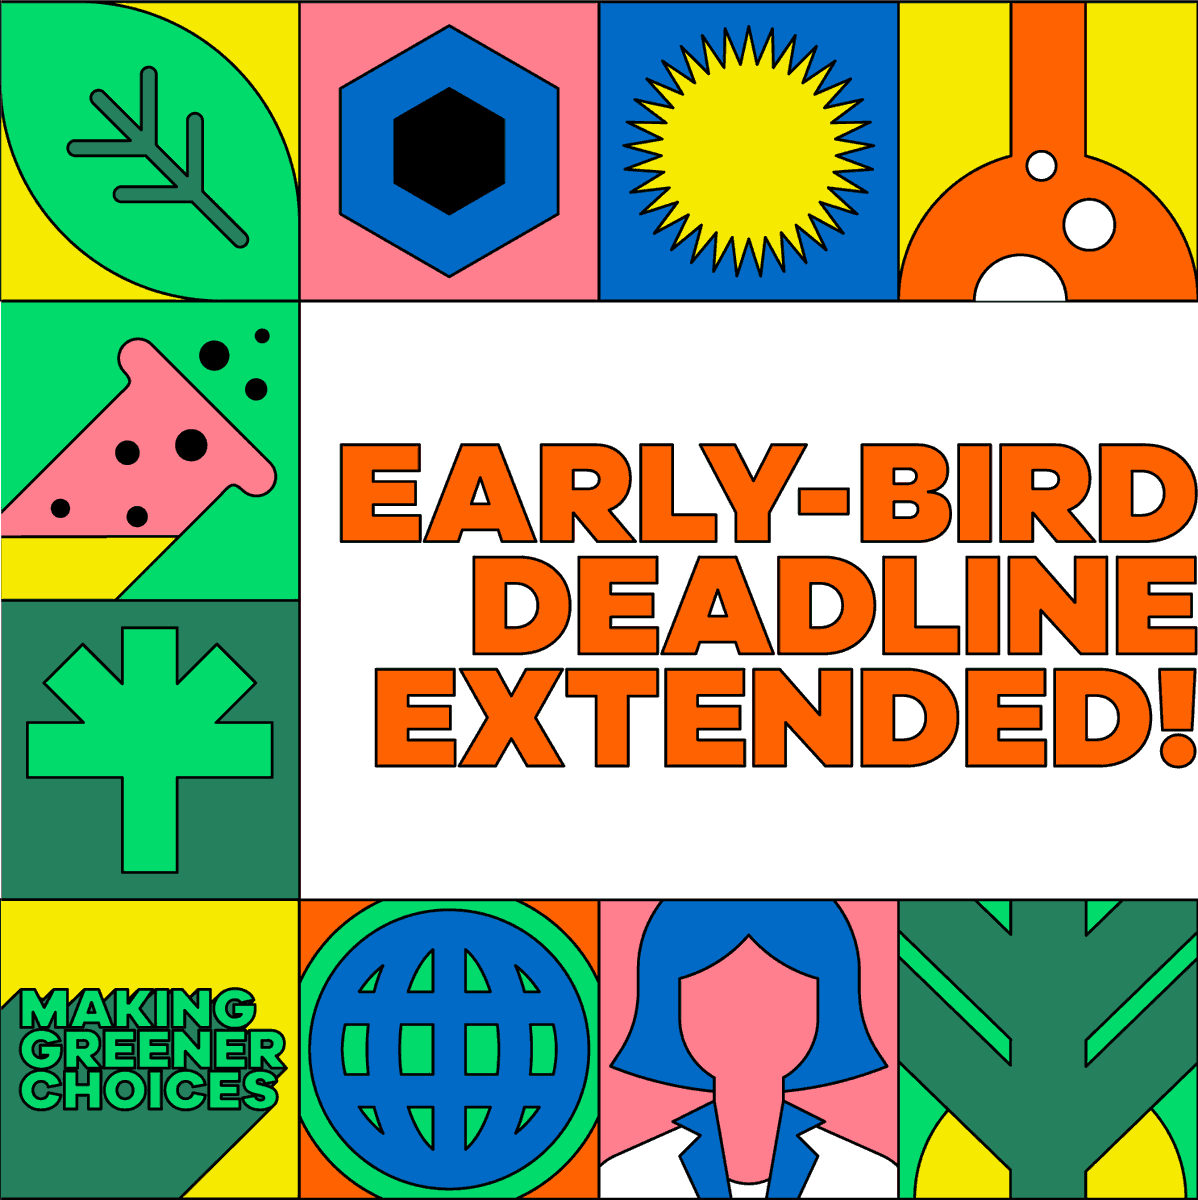 Due to popular demand, we've extended the early bird registration deadline for the Symposium to April 8th! Don't miss out on discounted rates and securing your spot. Register now and remember: you can always join us virtually! Get your tickets here: eventbrite.ca/e/making-green…